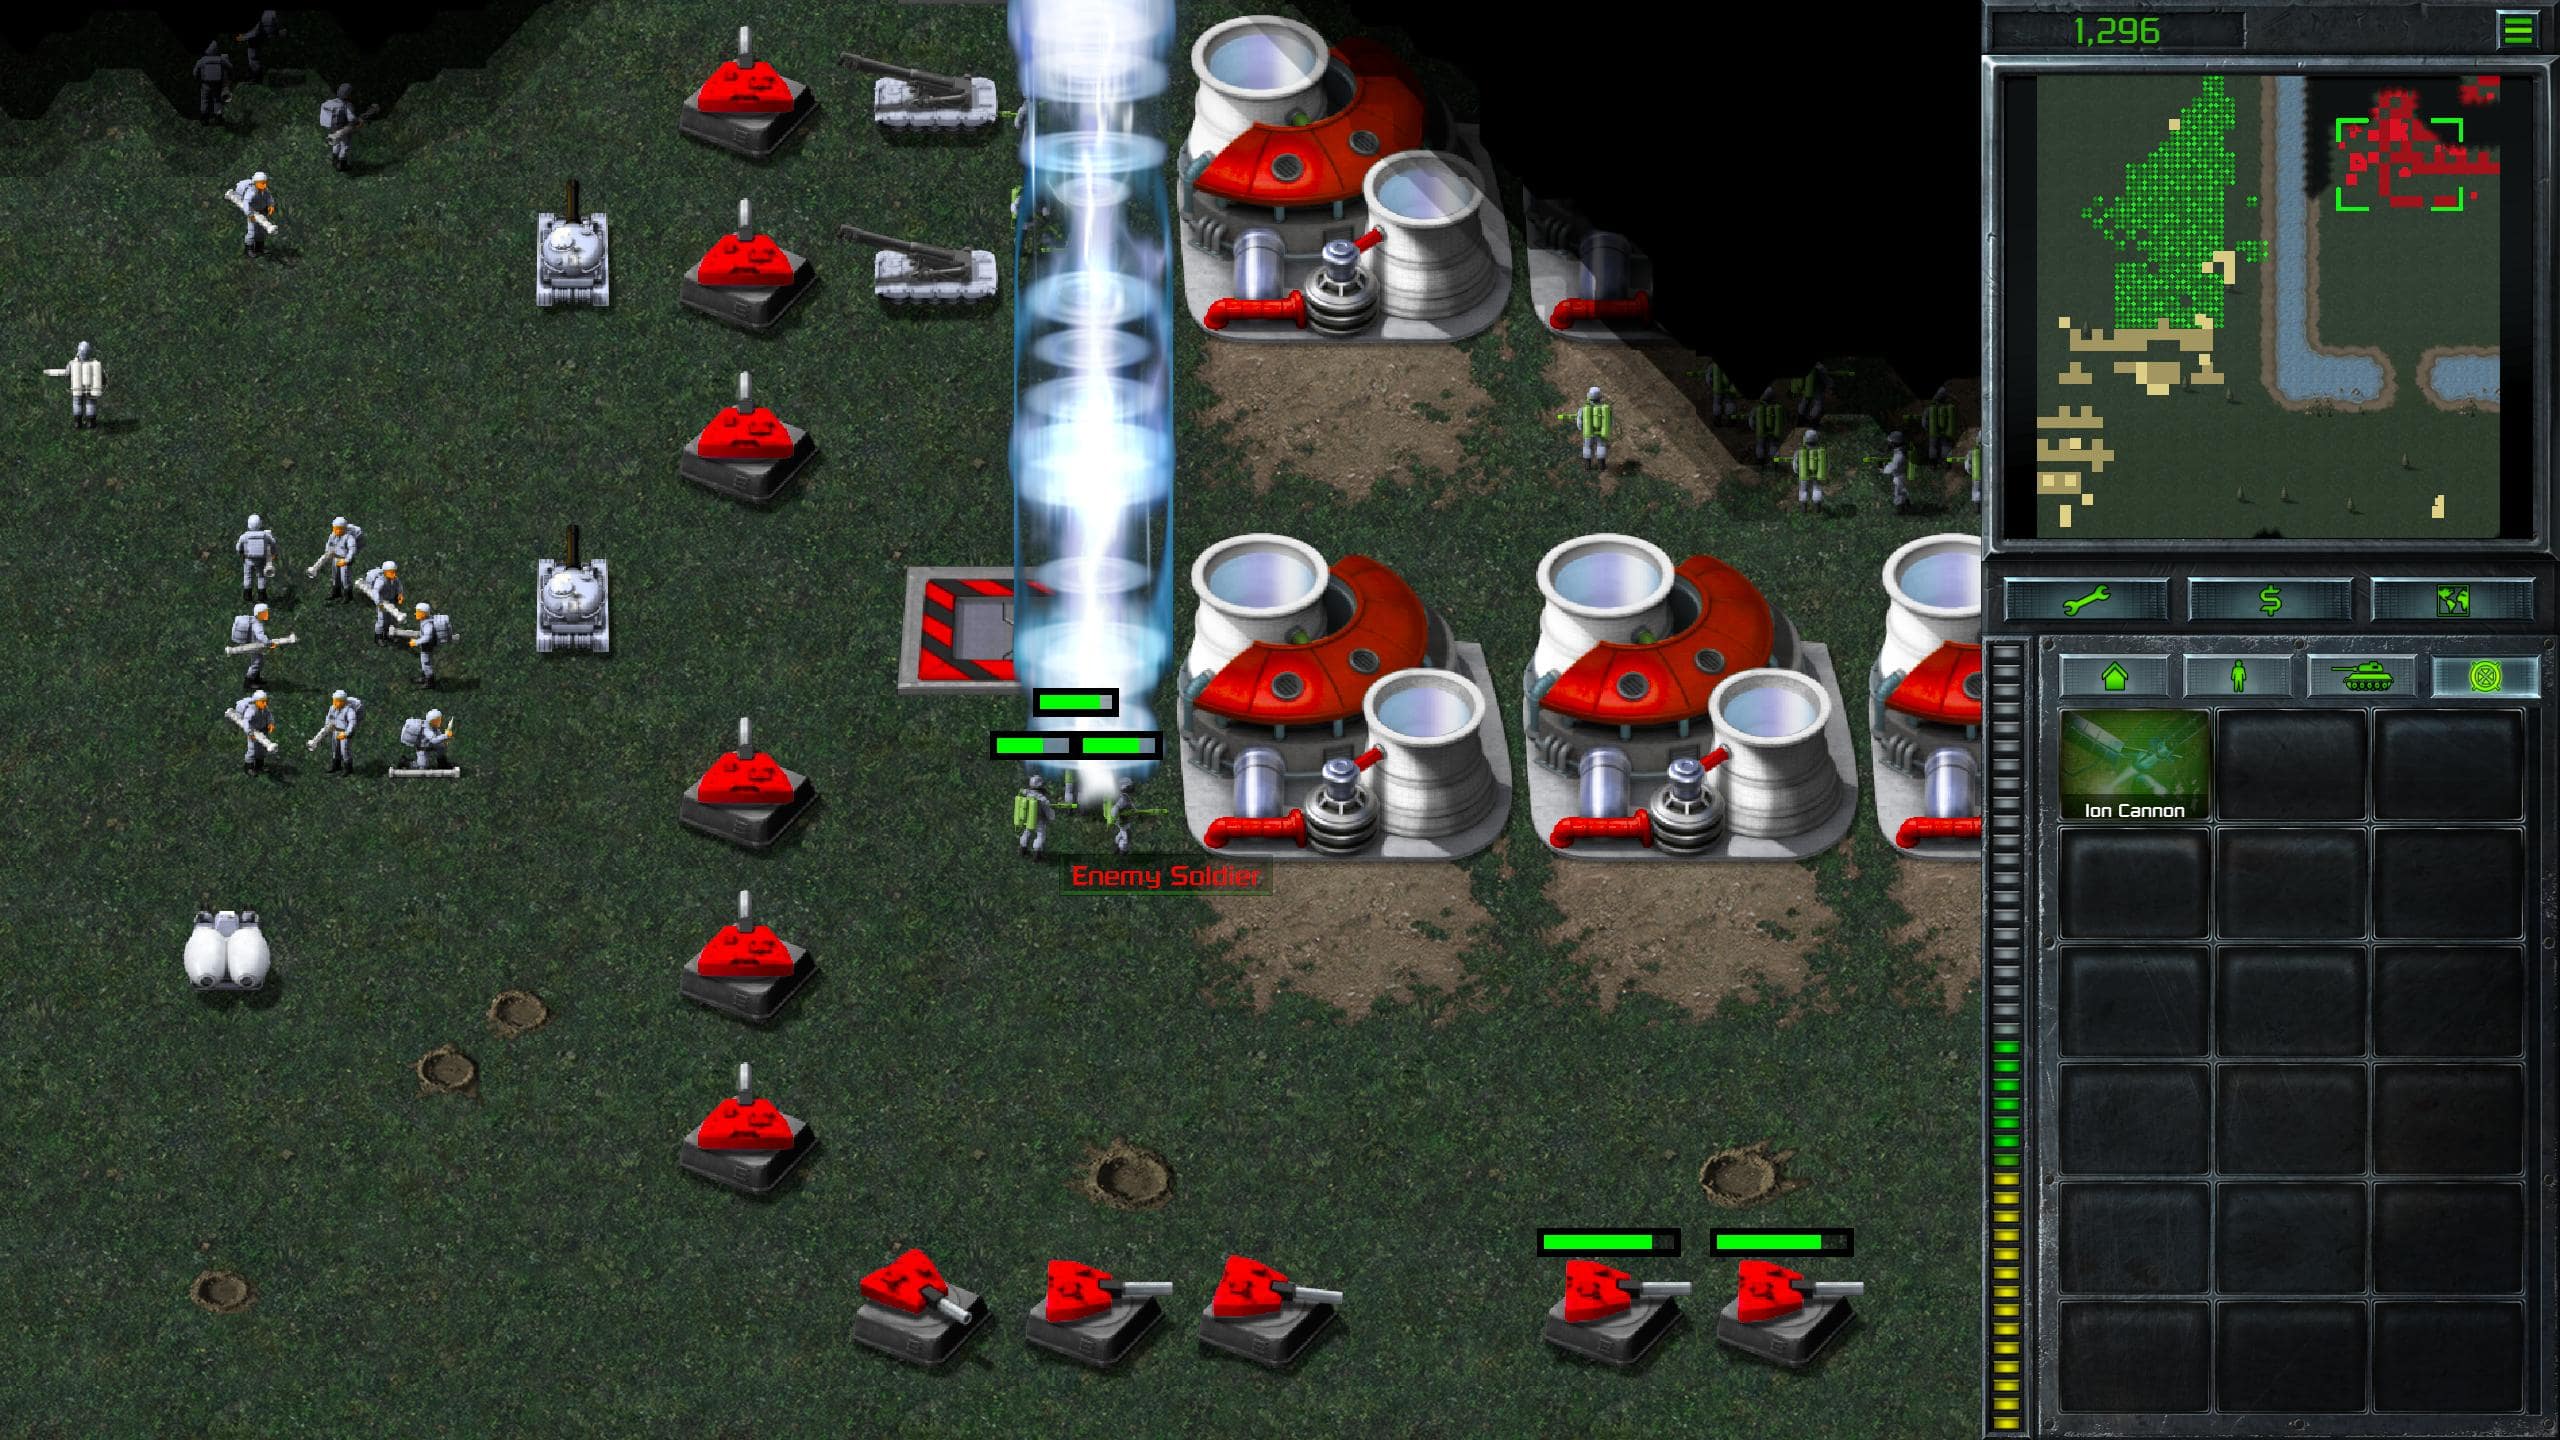 Command and conquer remastered